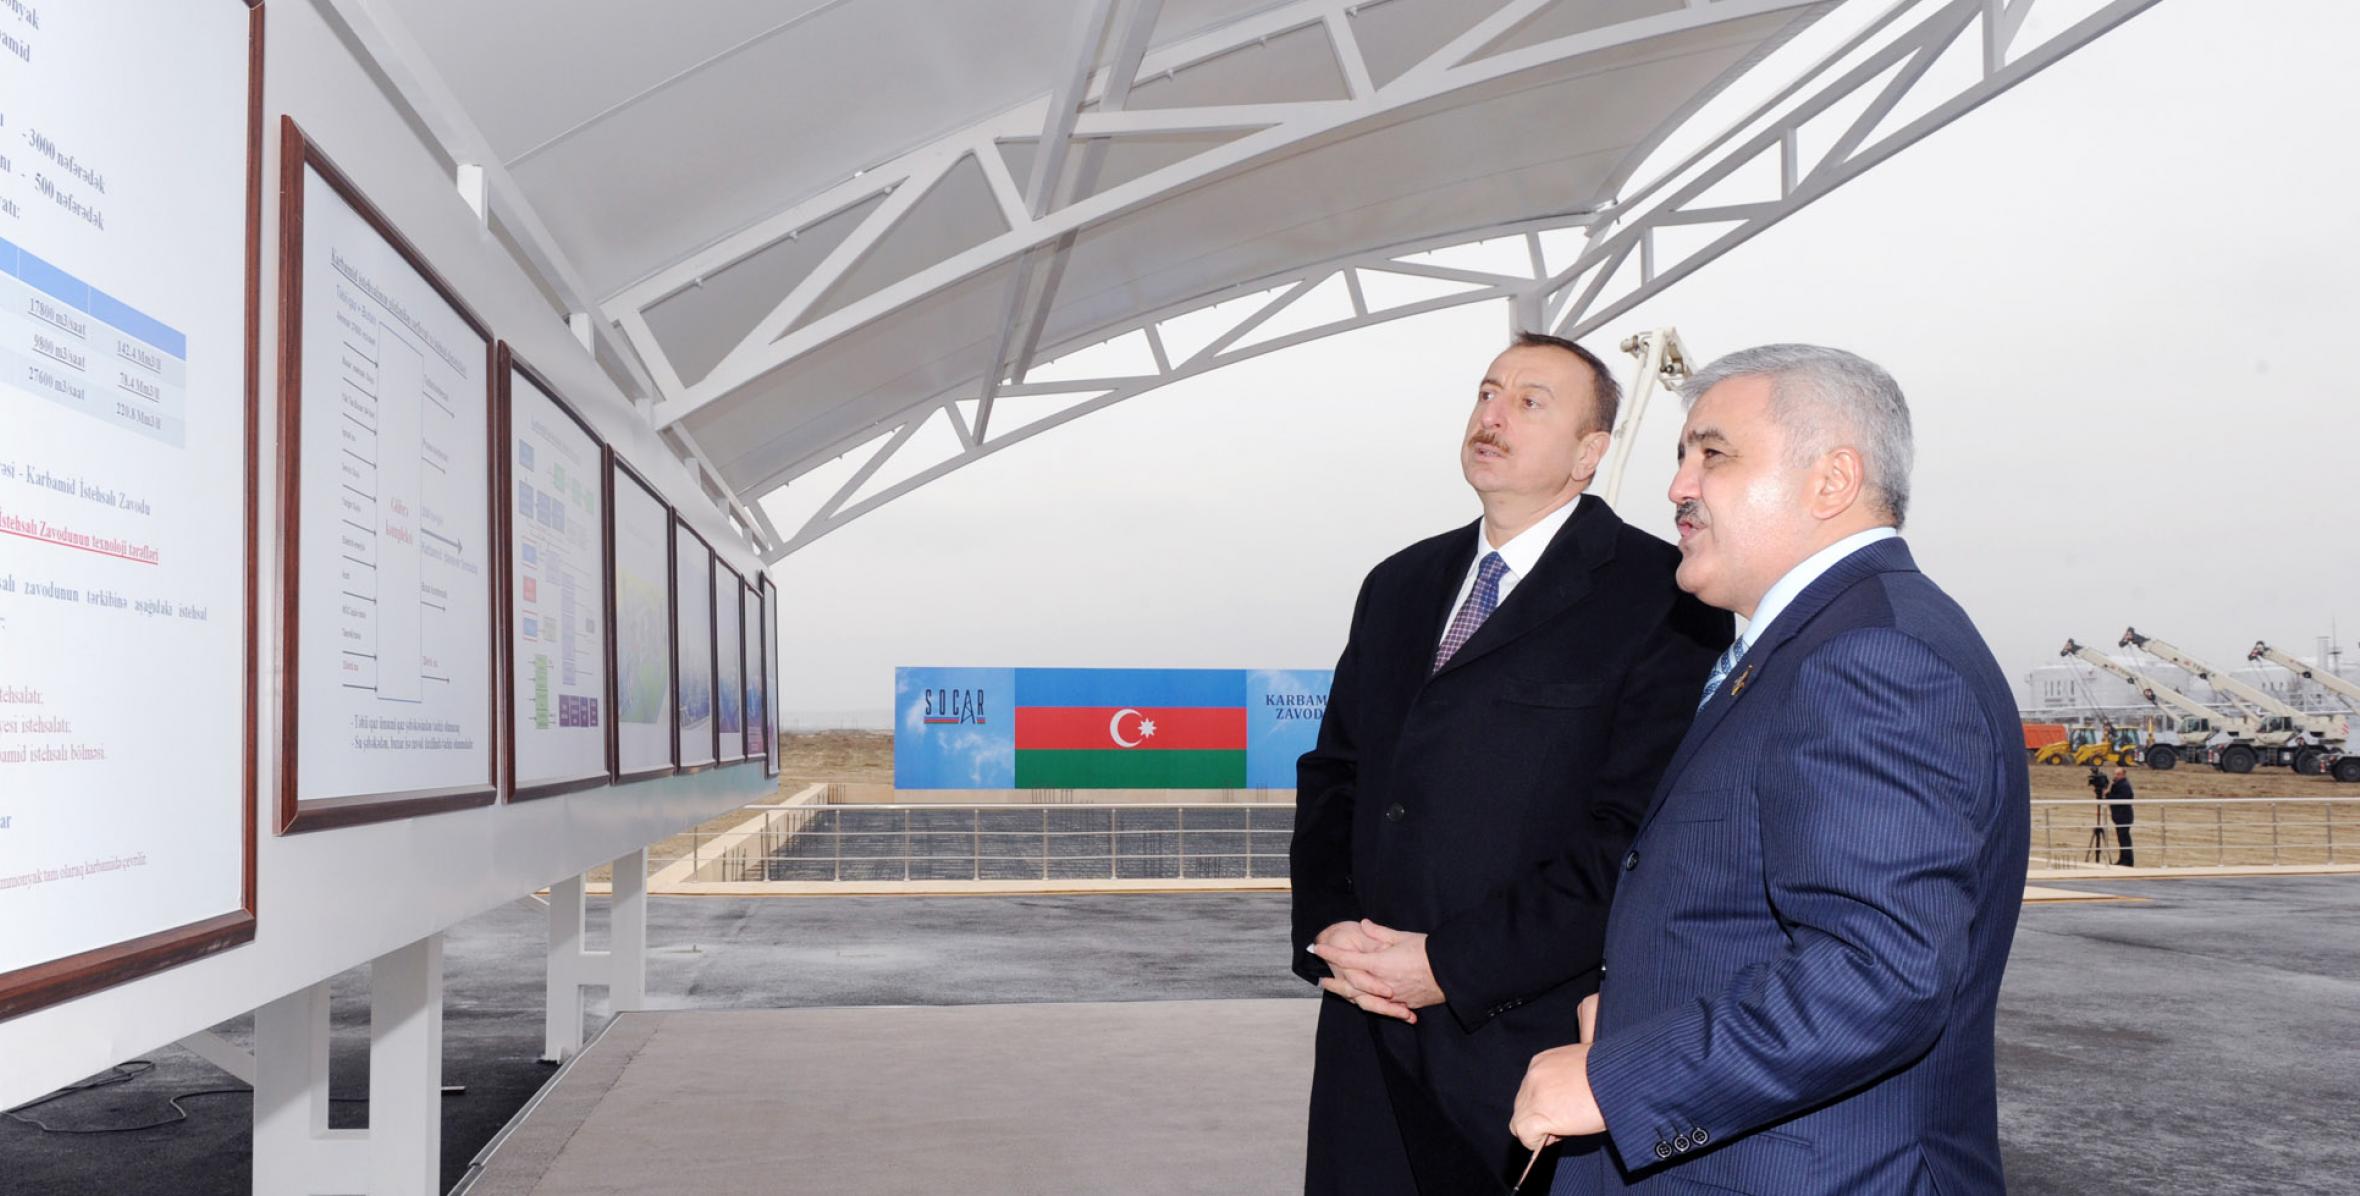 Ilham Aliyev attended the groundbreaking ceremony of a urea plant in Sumgayit